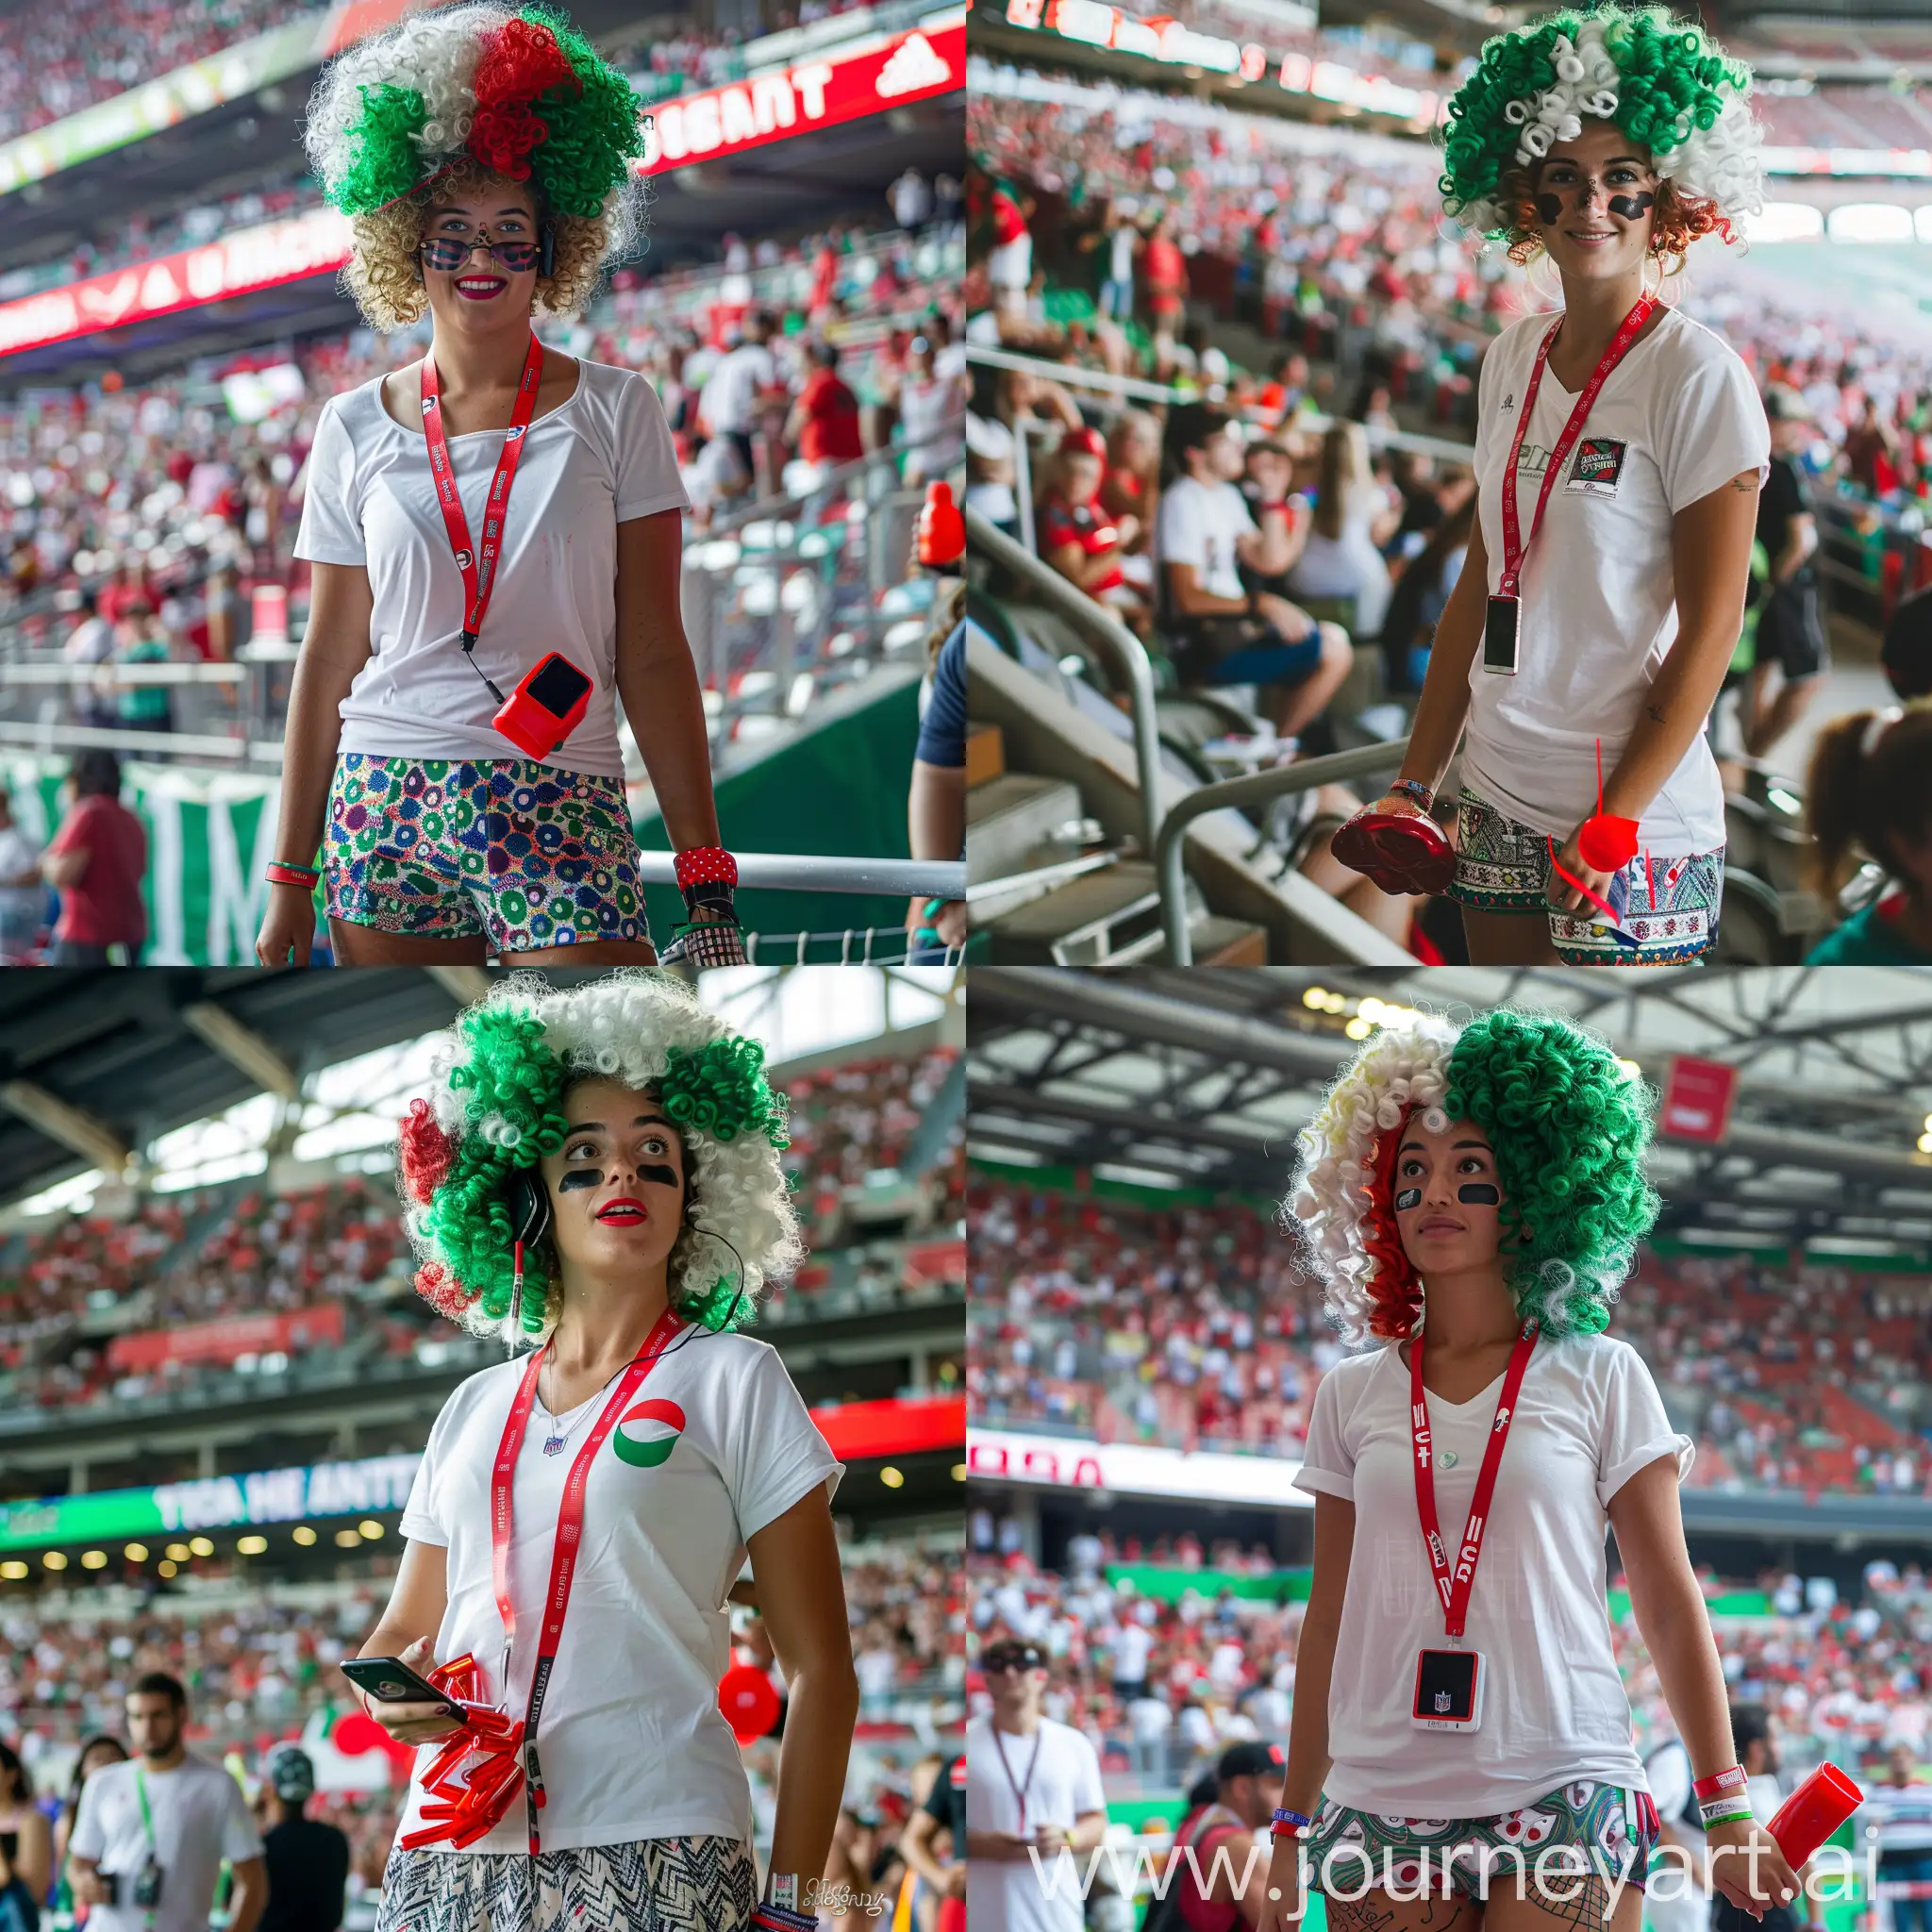 Vibrant-Football-Stadium-Scene-with-Curly-Wig-Fan-and-Red-Noise-Maker